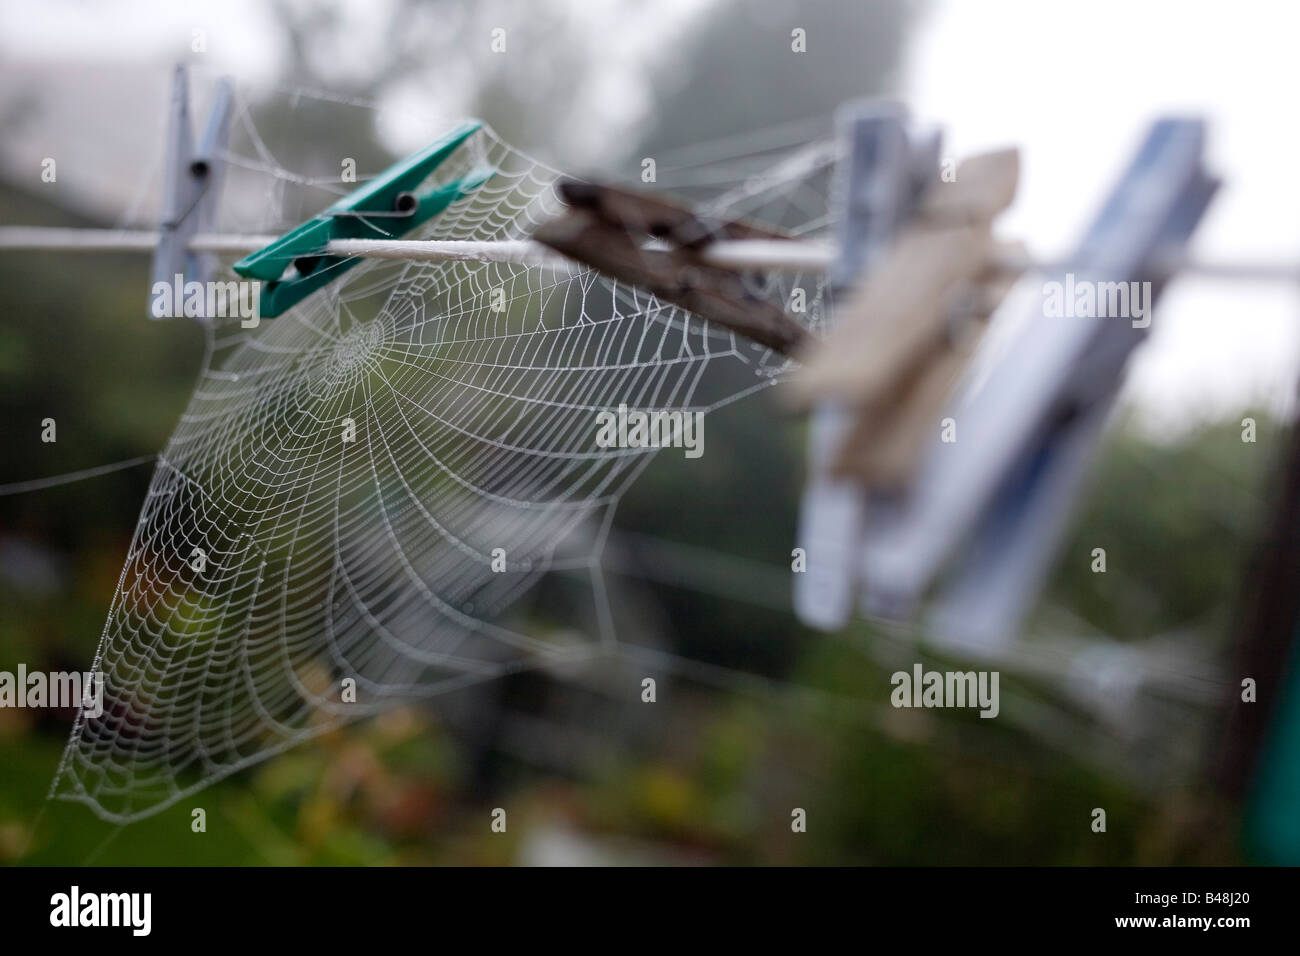 A spiders web on clothes pegs on a washing line. Stock Photo